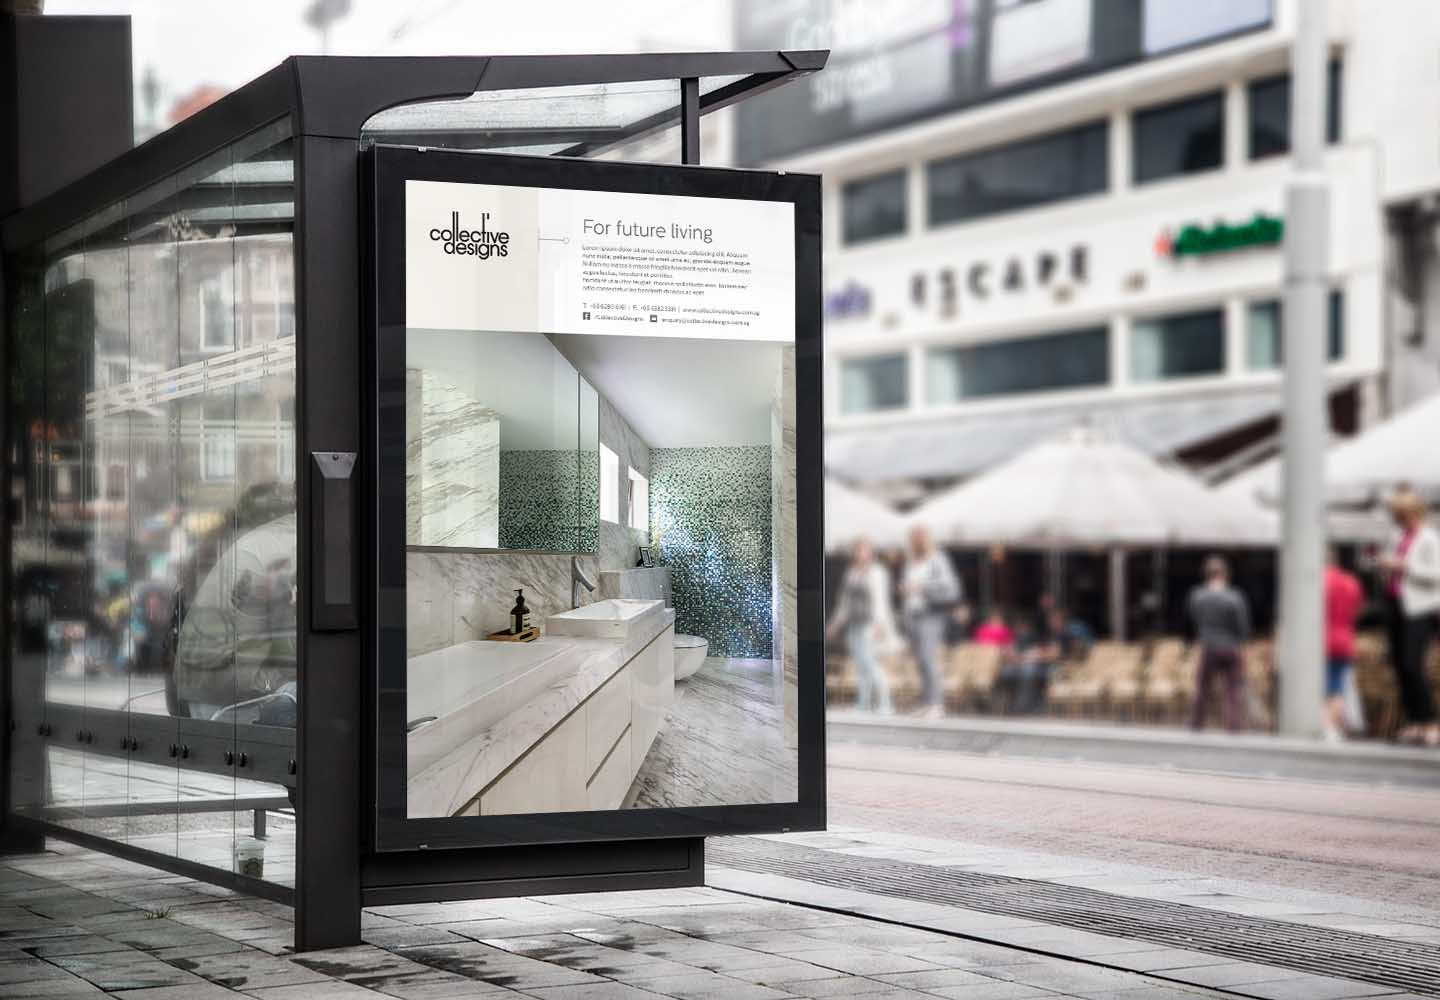 Brand Consultancy in Design Industry. Bus Stop Ad Design for Collective Designs